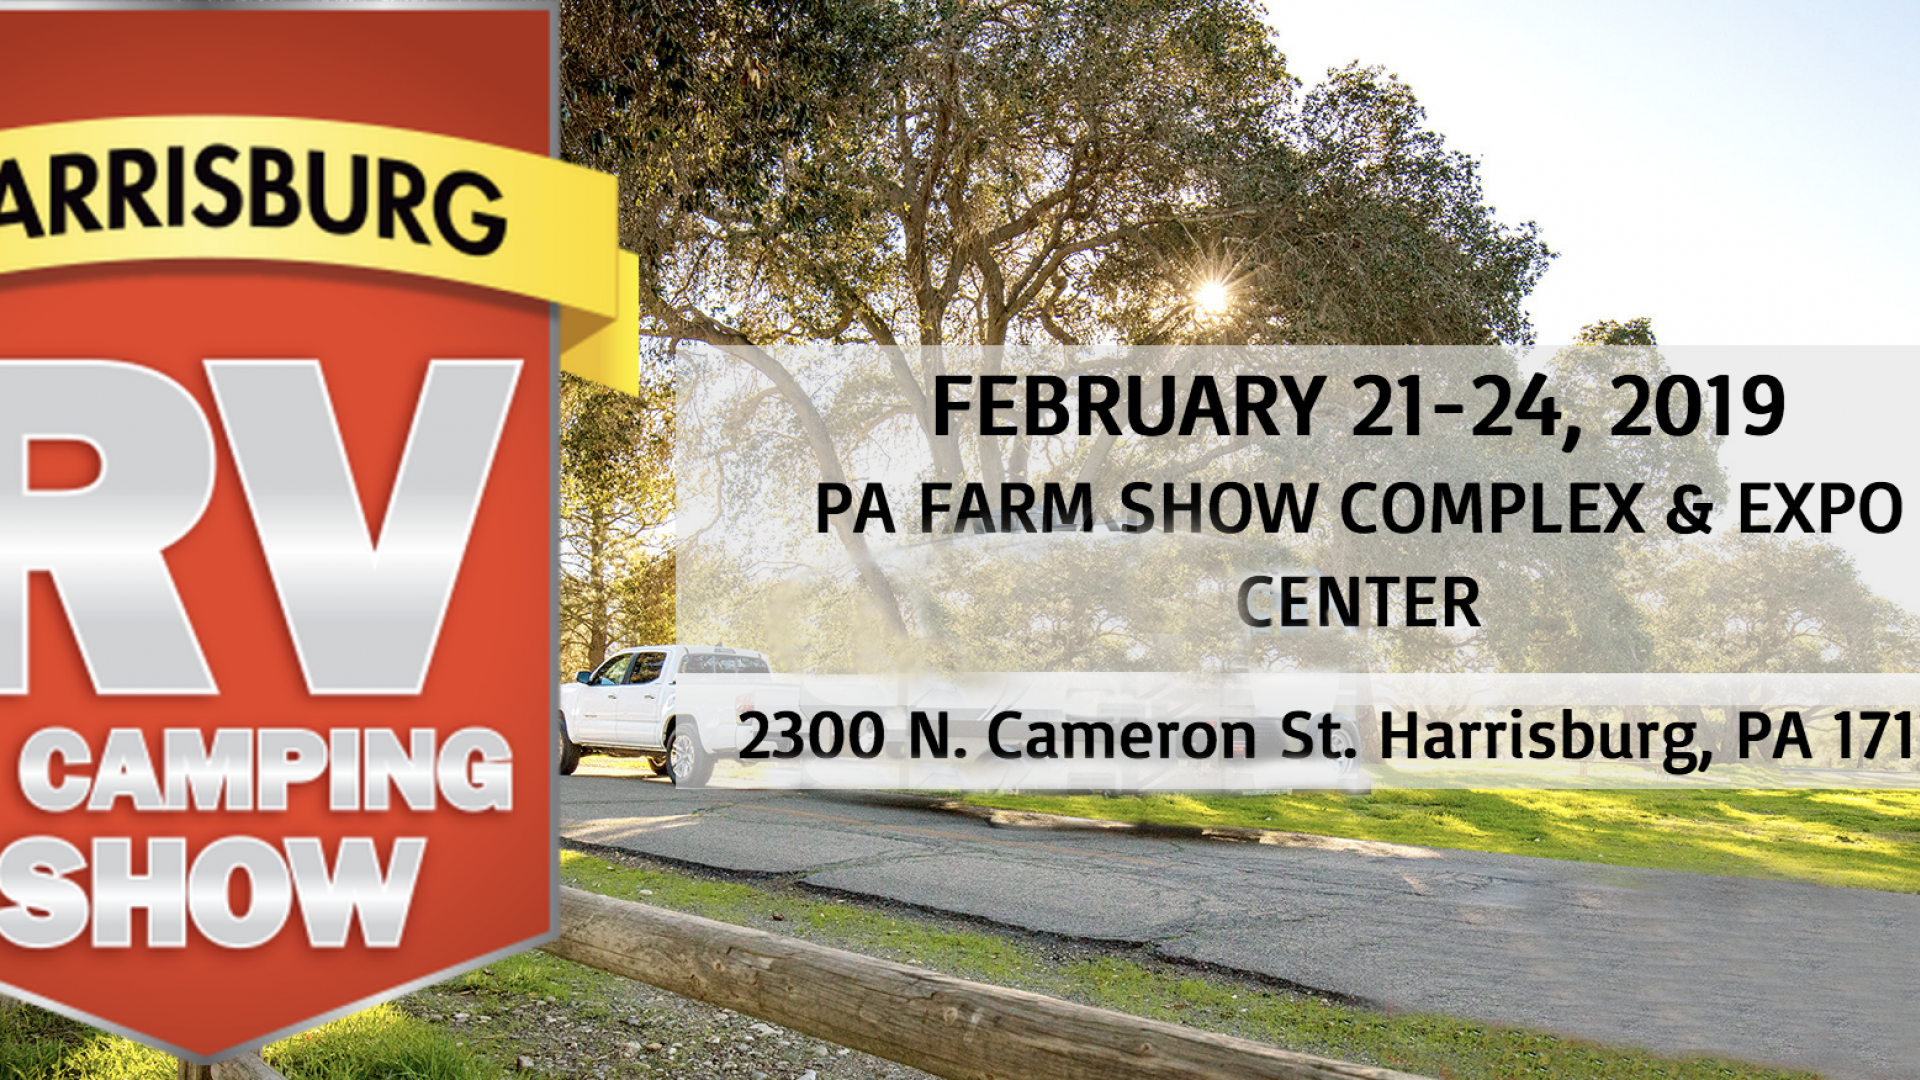 Harrisburg RV and Camping Show | GDRV4Life - Your Connection to the